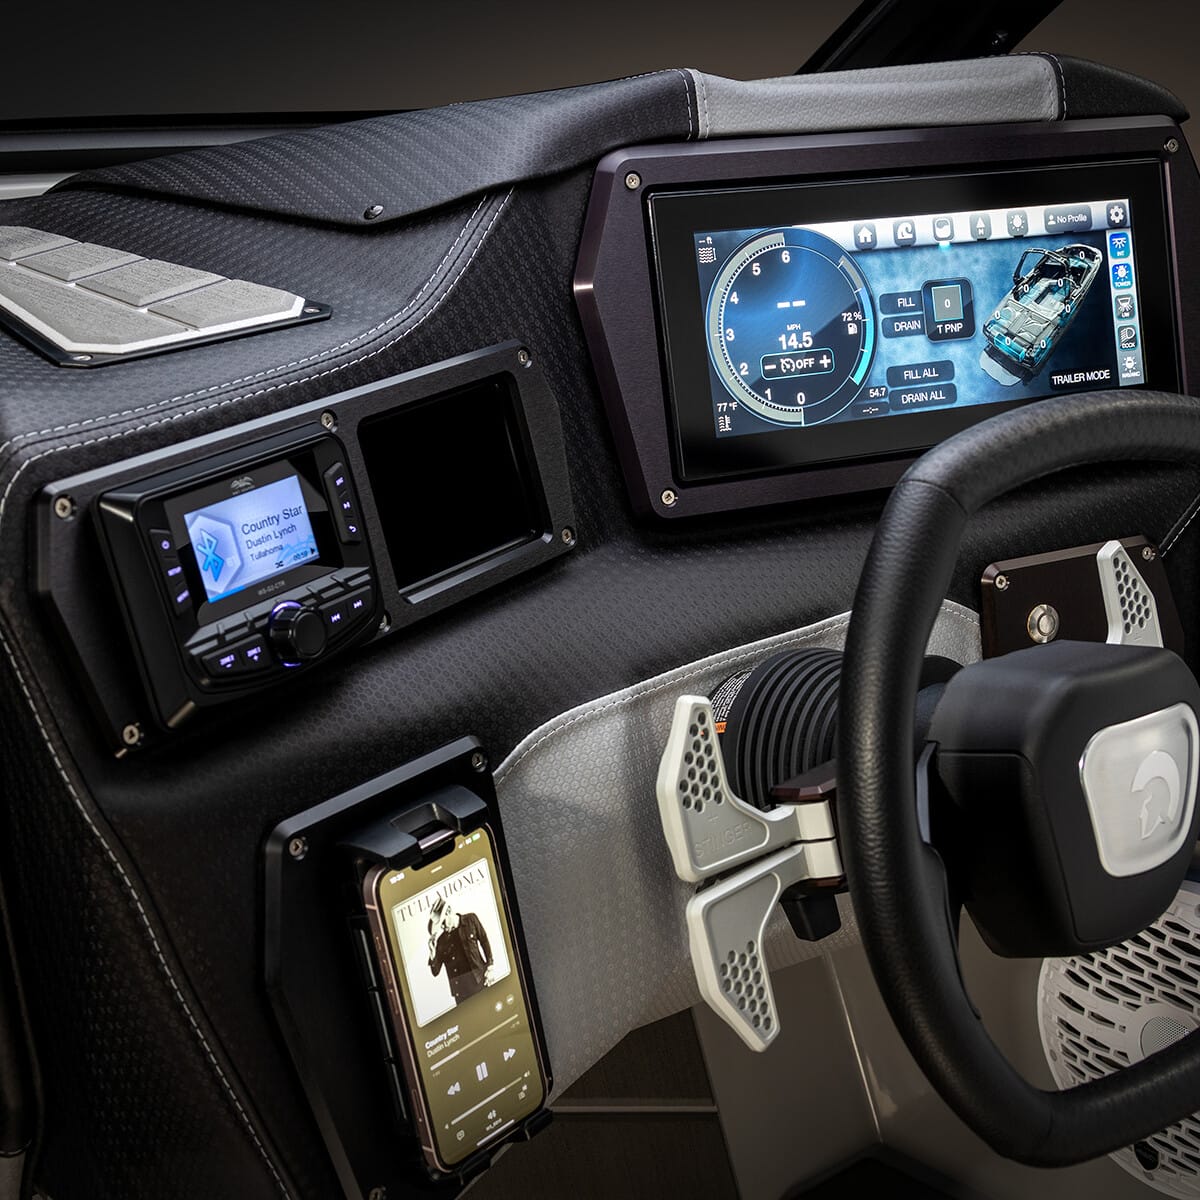 Dashboard of a modern vehicle featuring a digital display, various controls, a mounted smartphone, and a steering wheel with a small screen in the center.